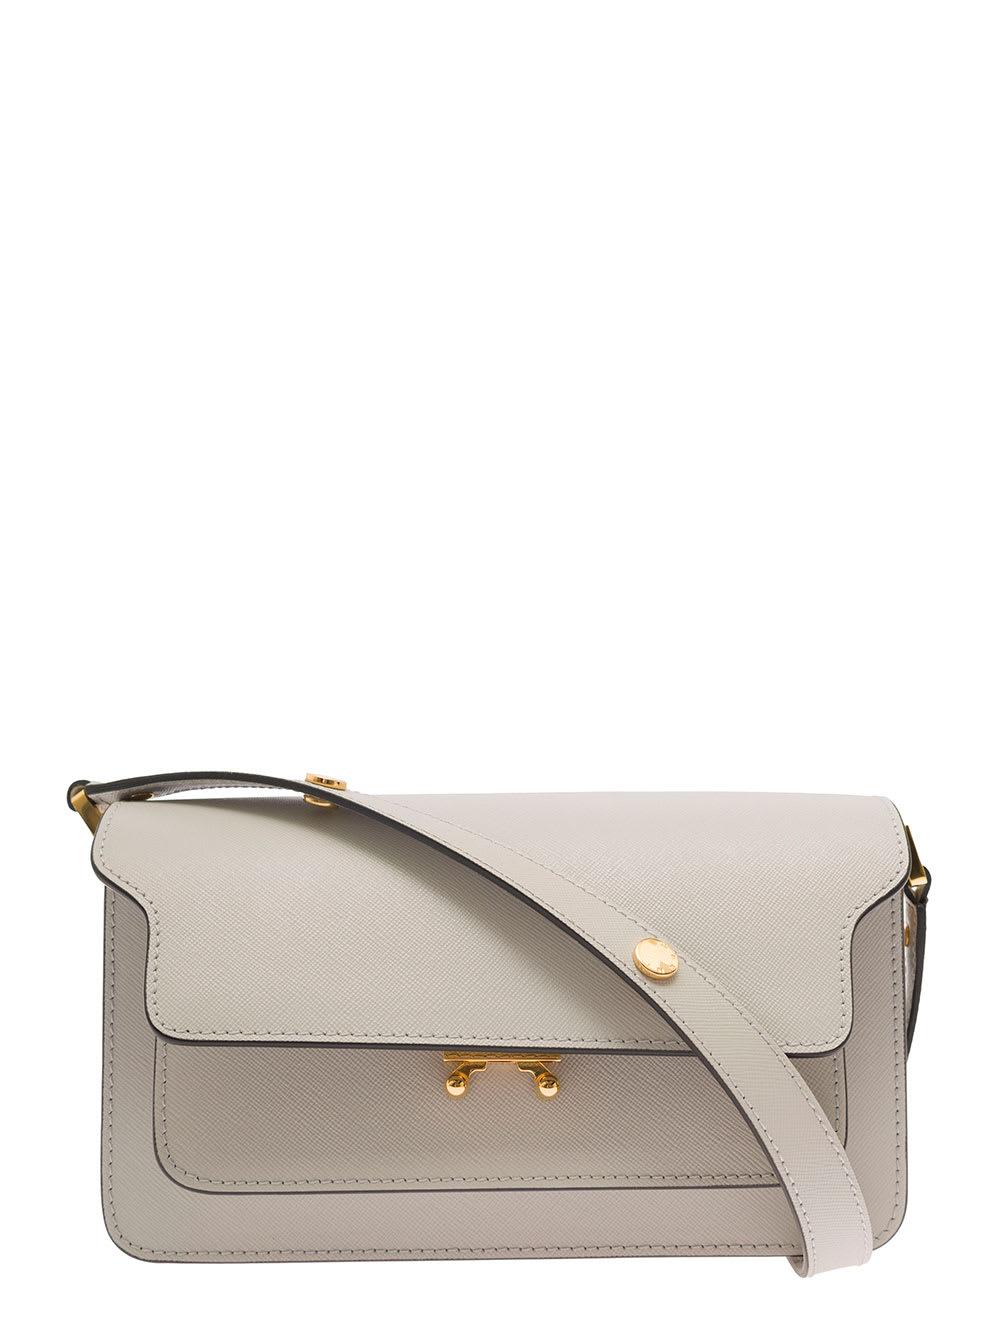 Marni Trunk White Shoulder Bag With Push-Lock Fastening In Leather Woman